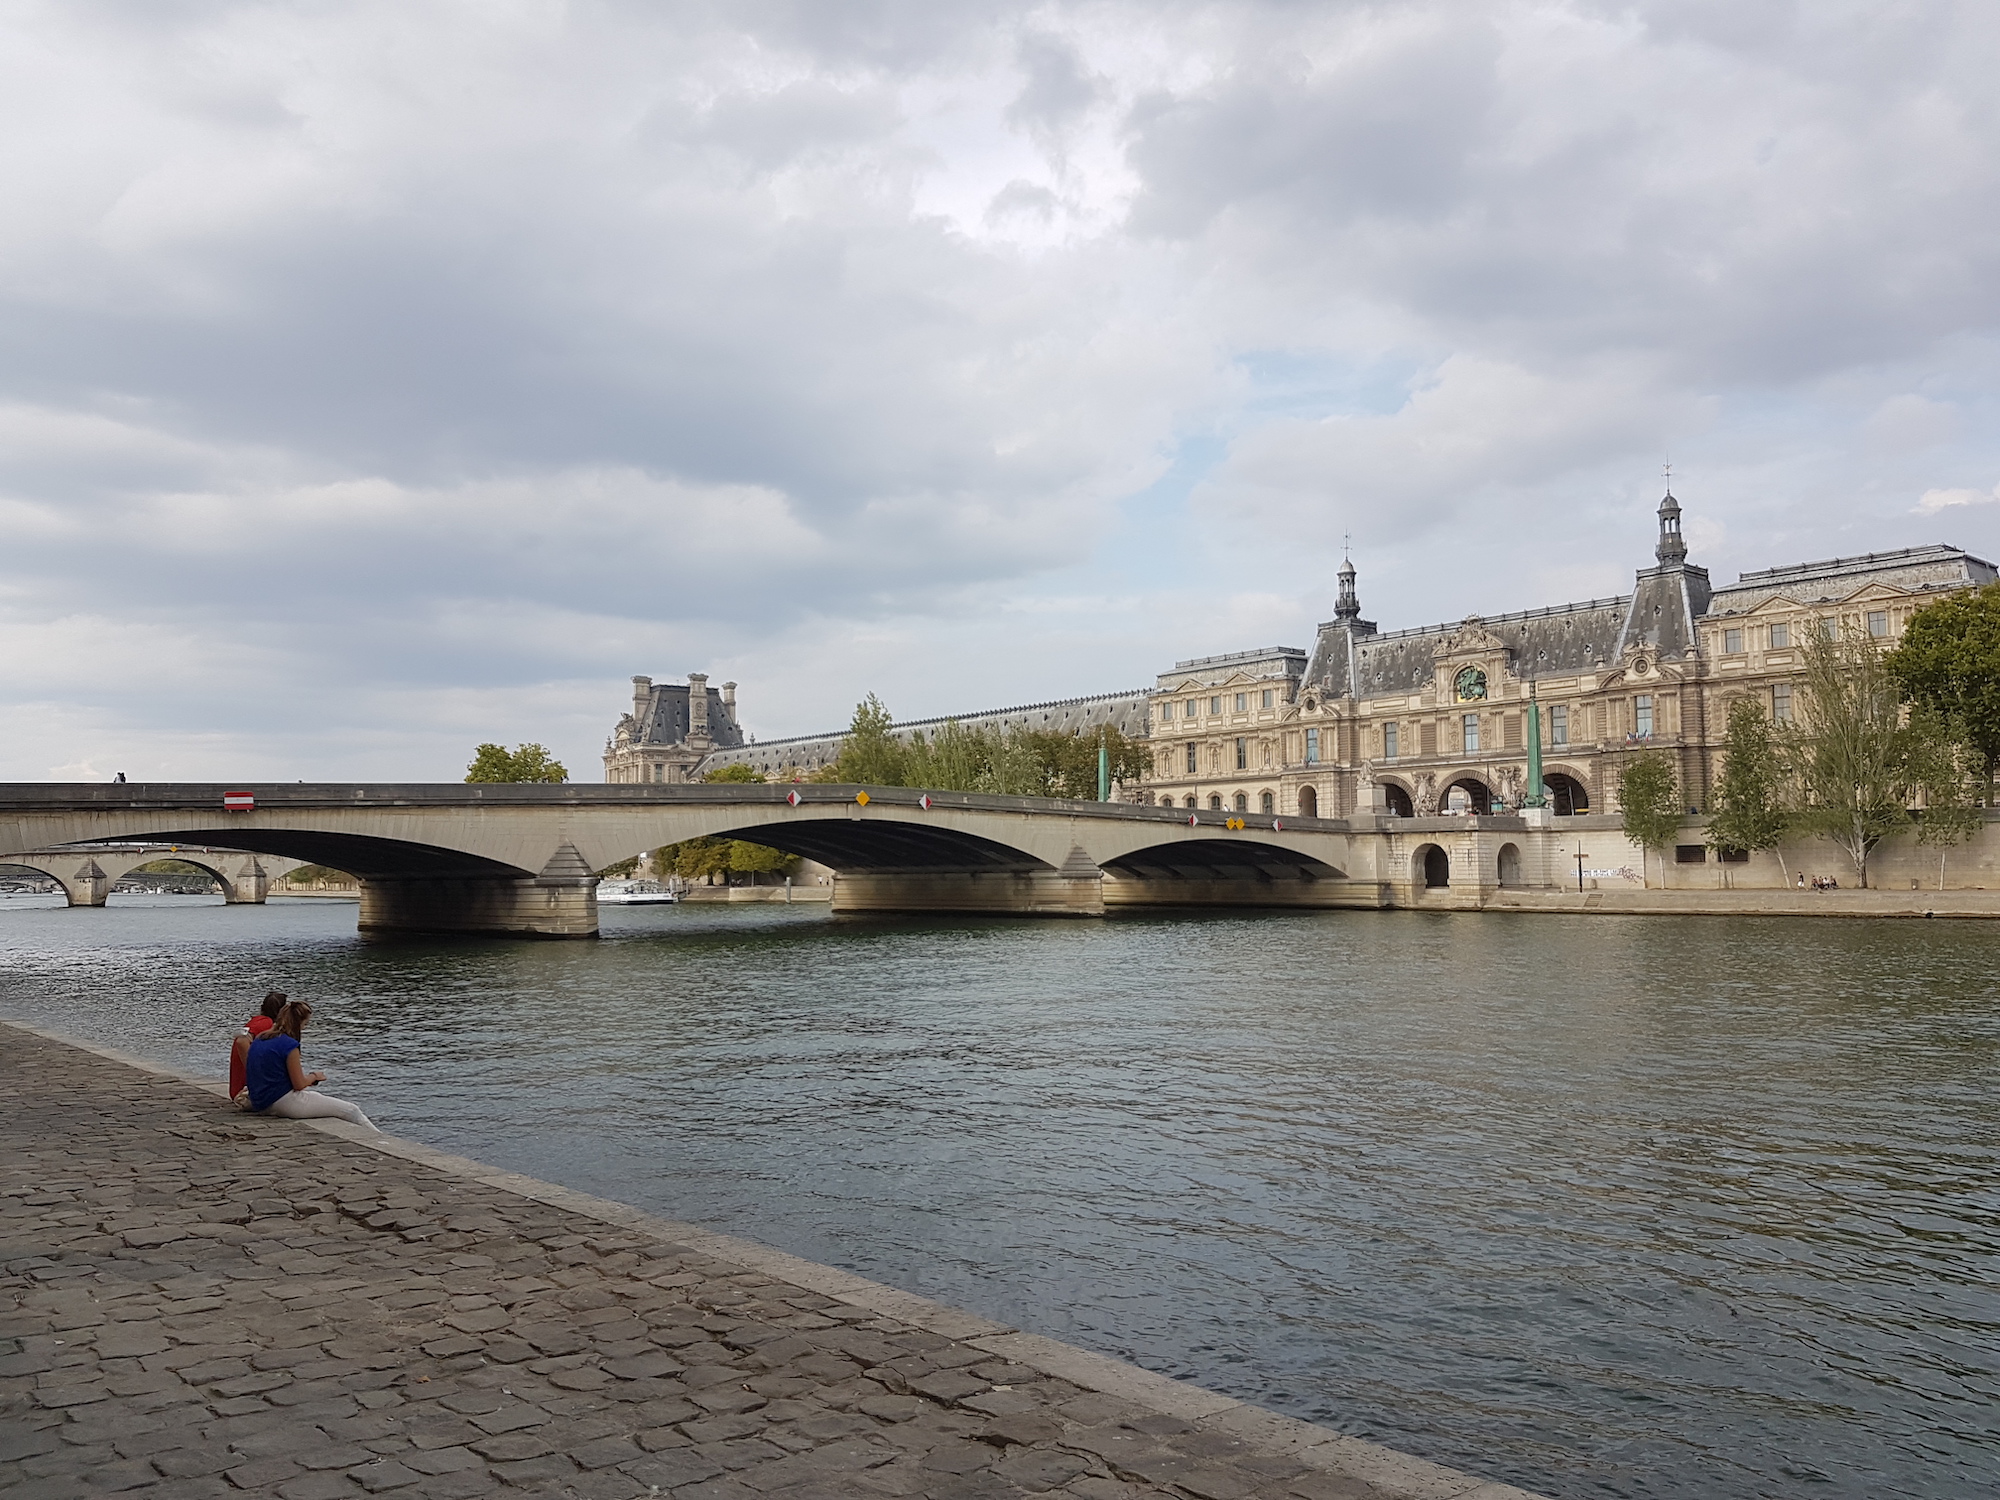 History of the Pont Neuf - The oldest bridge in Paris